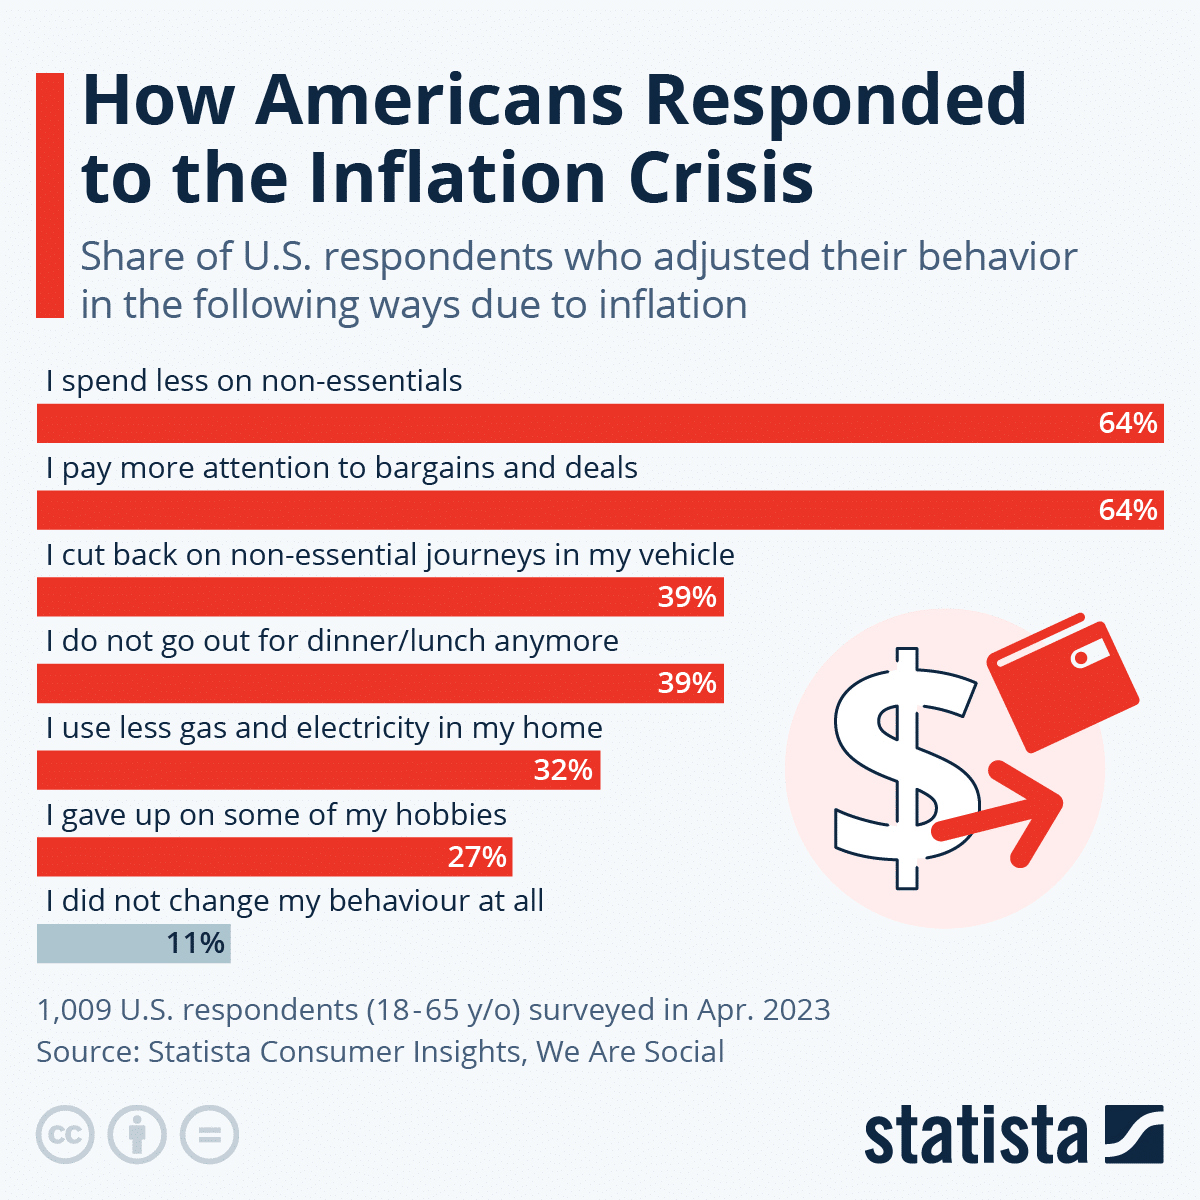 American Response to Inflation